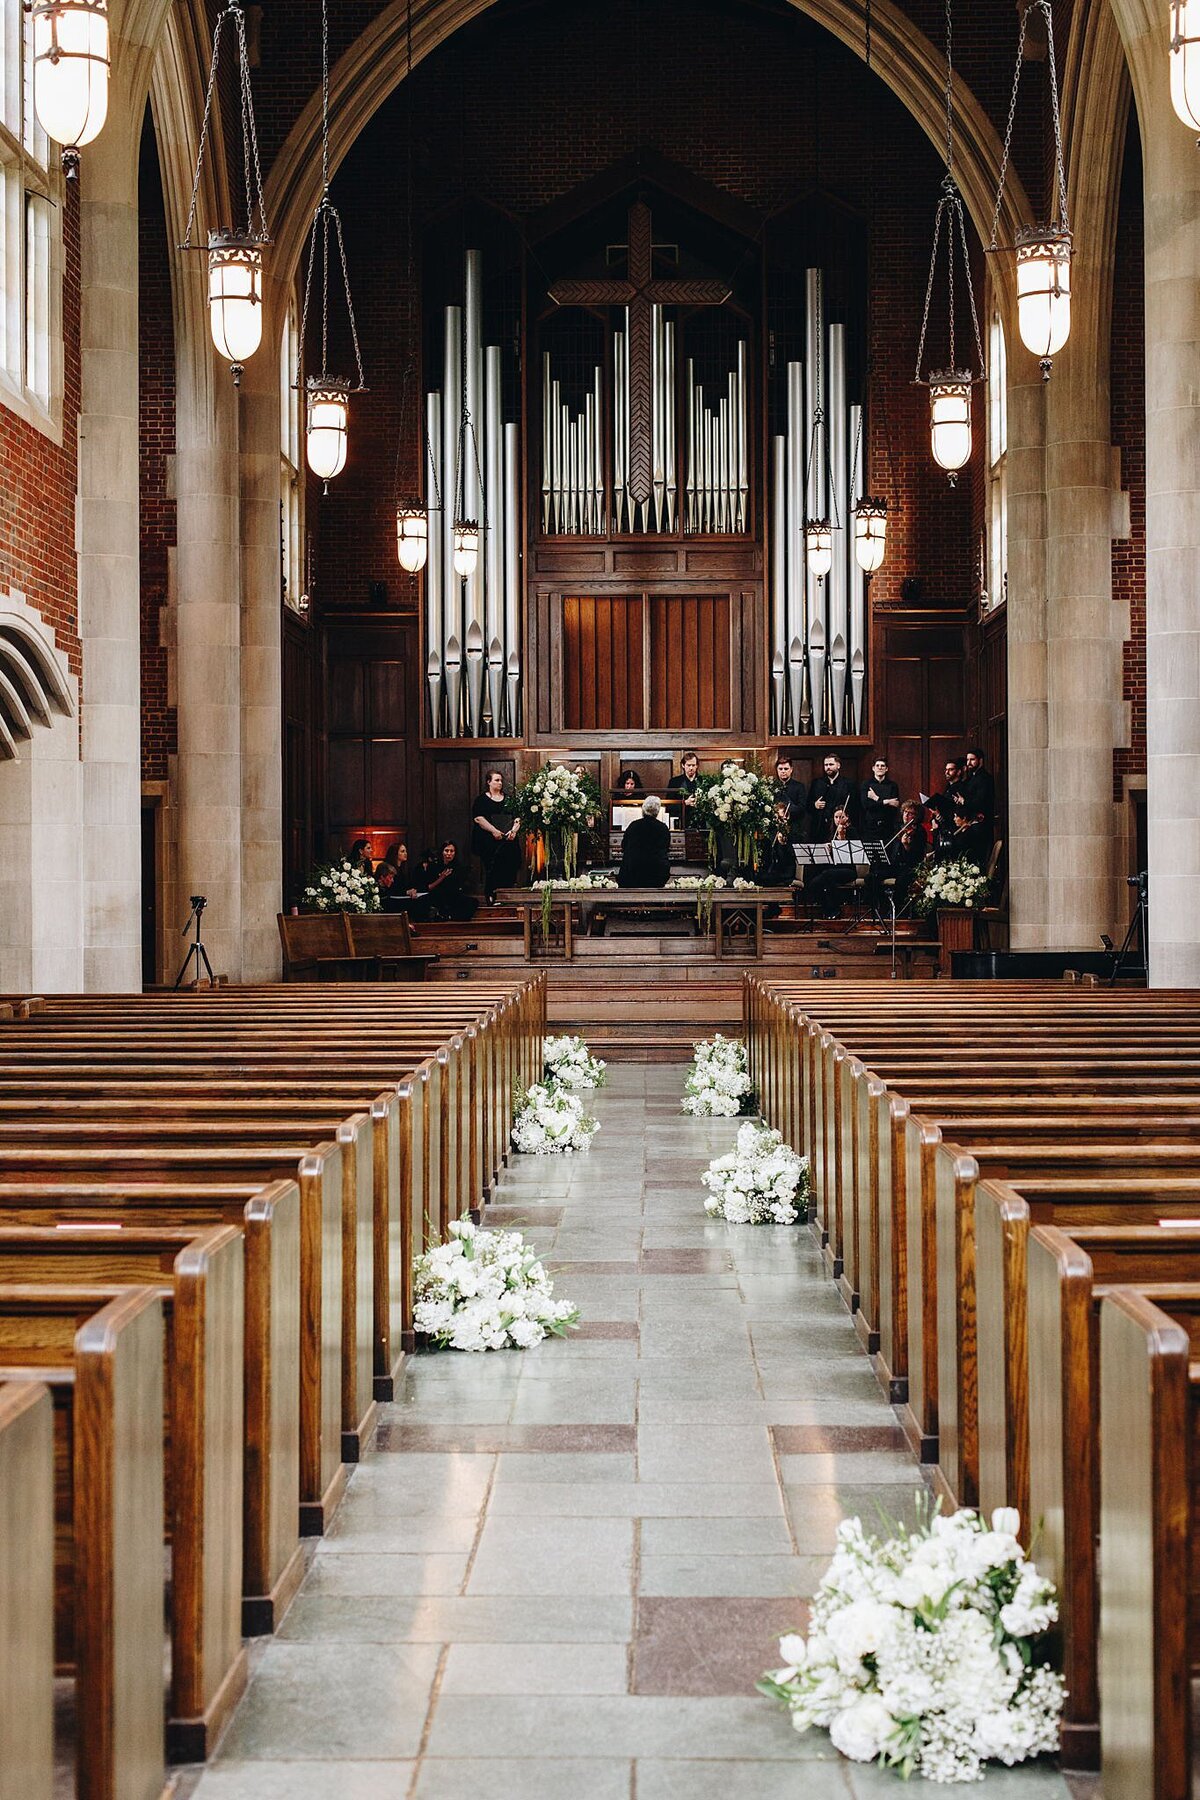 Church with many rows of brown wood pews lead up to the altar where an orchestra sits in front of a large pipe organ. The aisle is decorated with white floral arrangements.